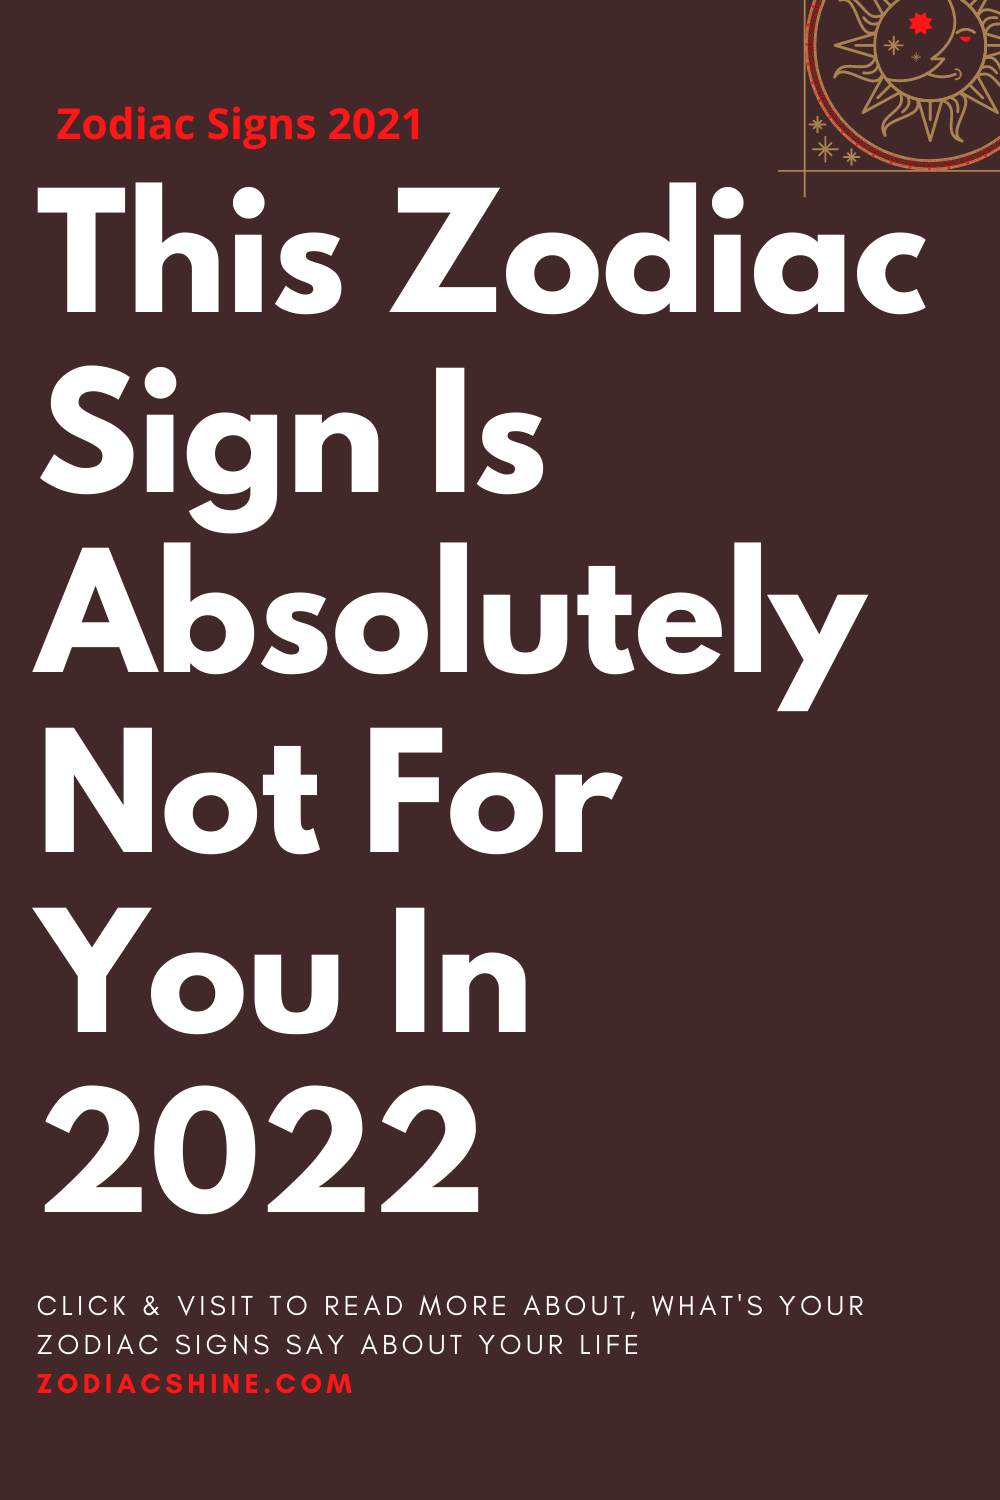 This Zodiac Sign Is Absolutely Not For You In 2022